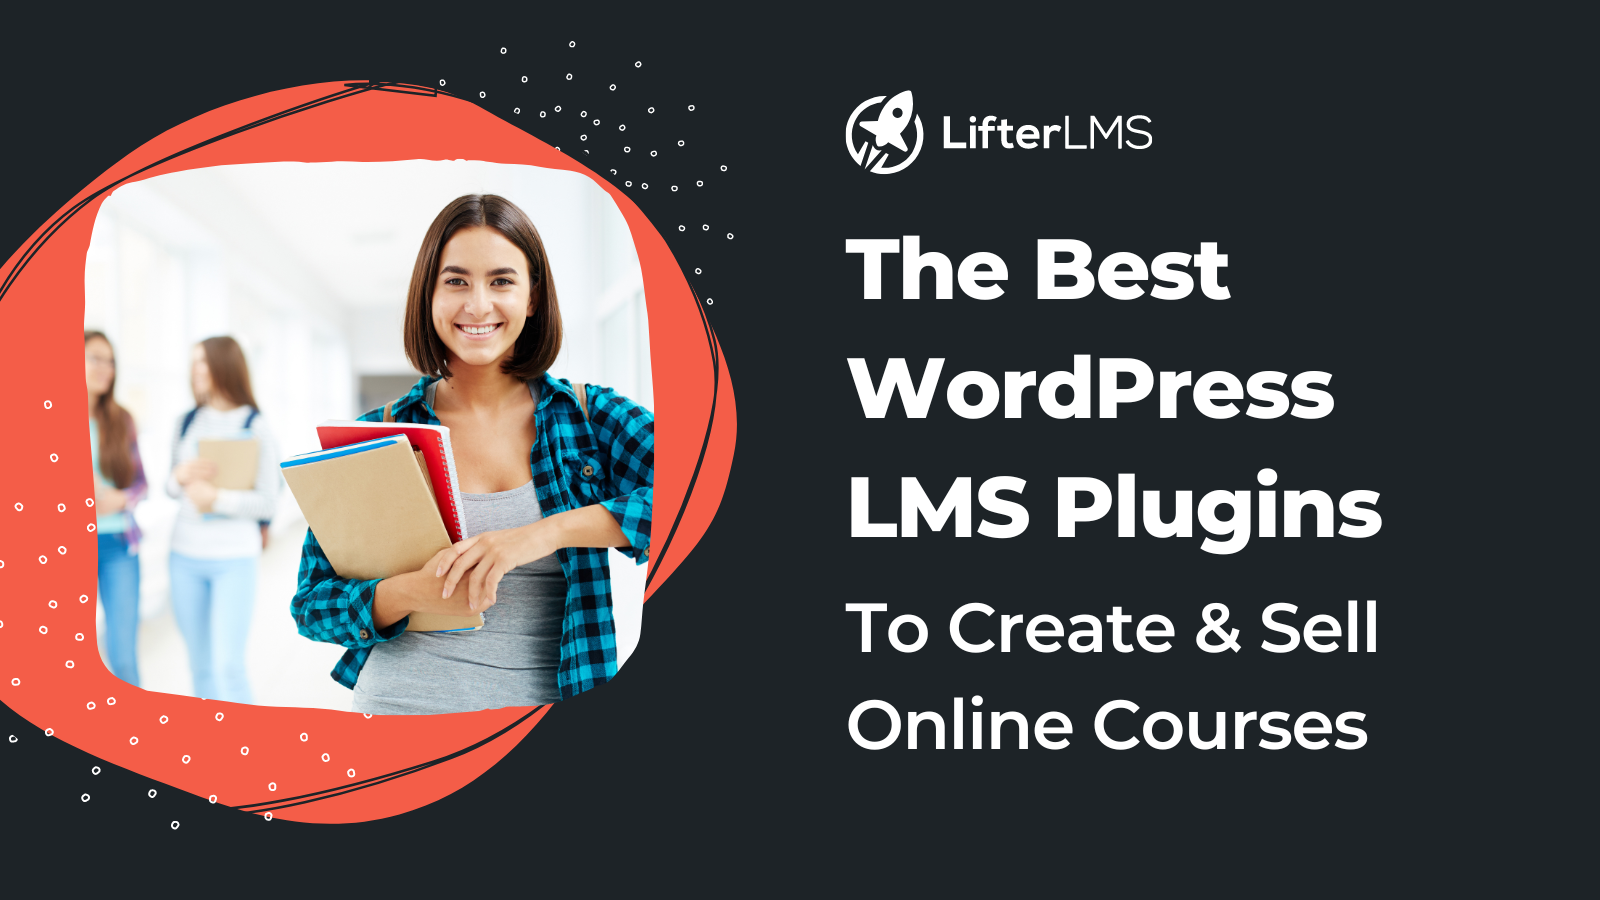 4 Best WordPress LMS Plugins To Create & Sell Courses Online